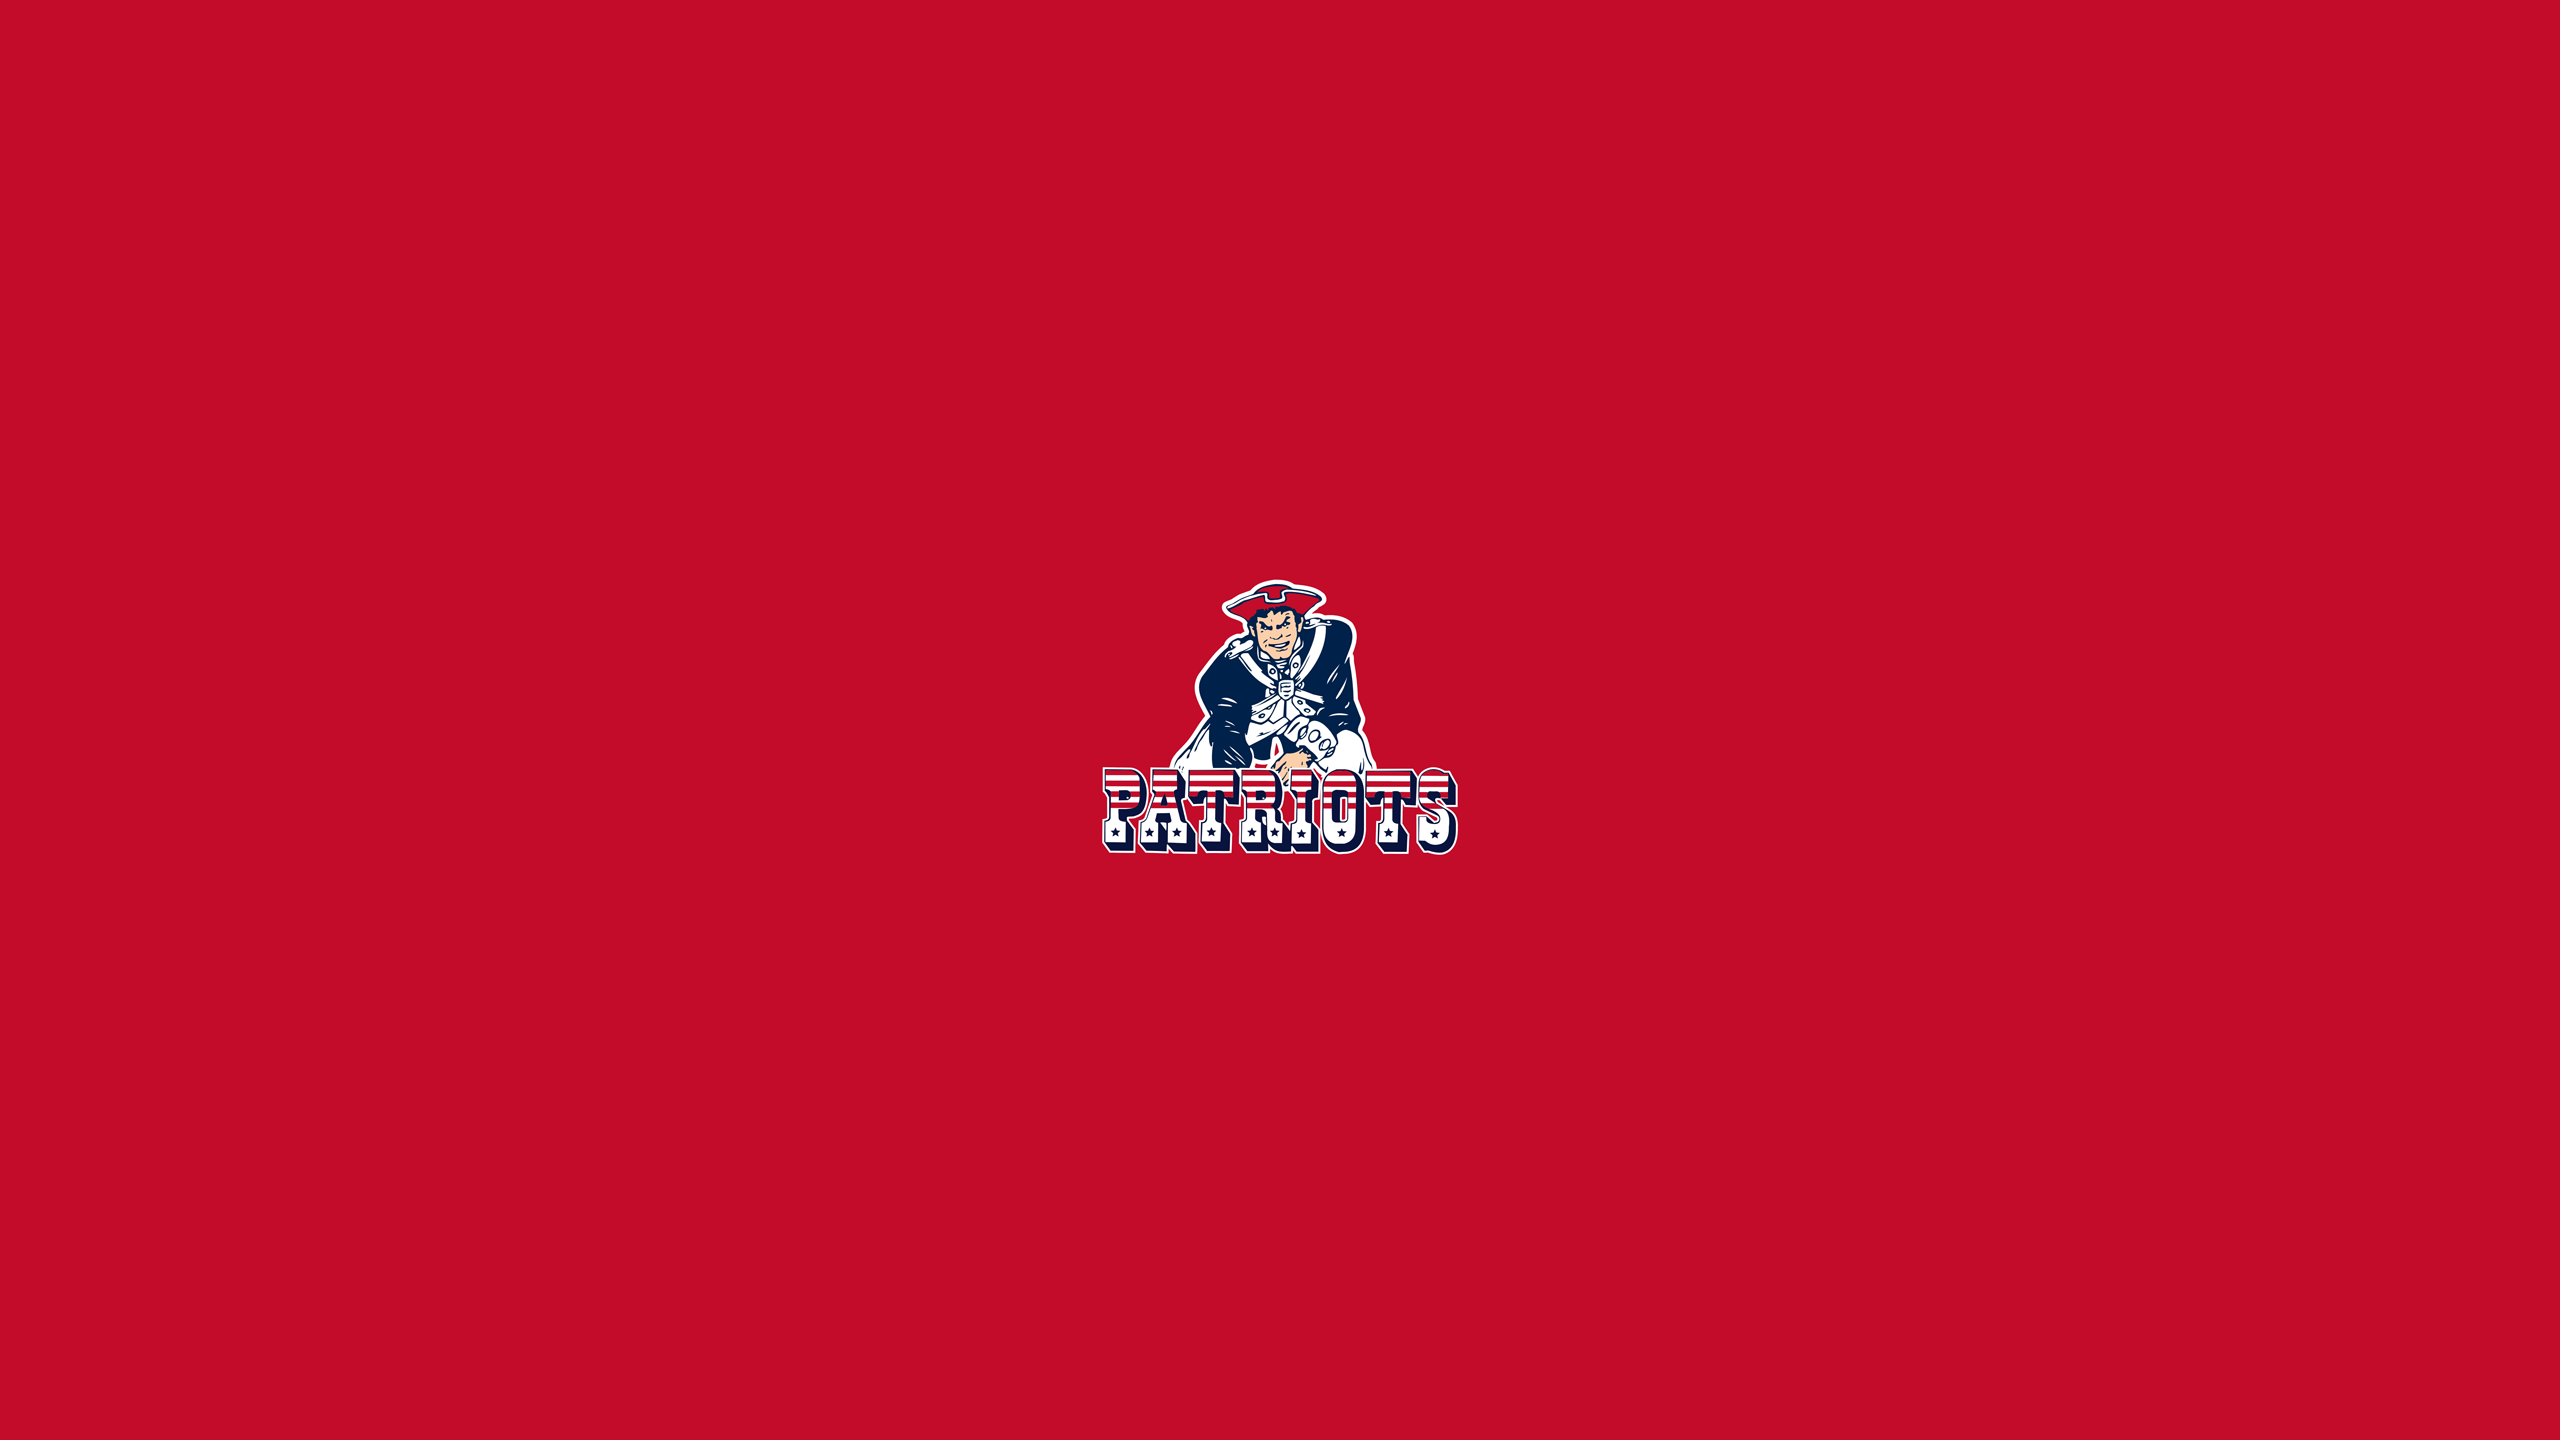 Old New England Patriots Logo Wallpaper New Images Crazy Gallery